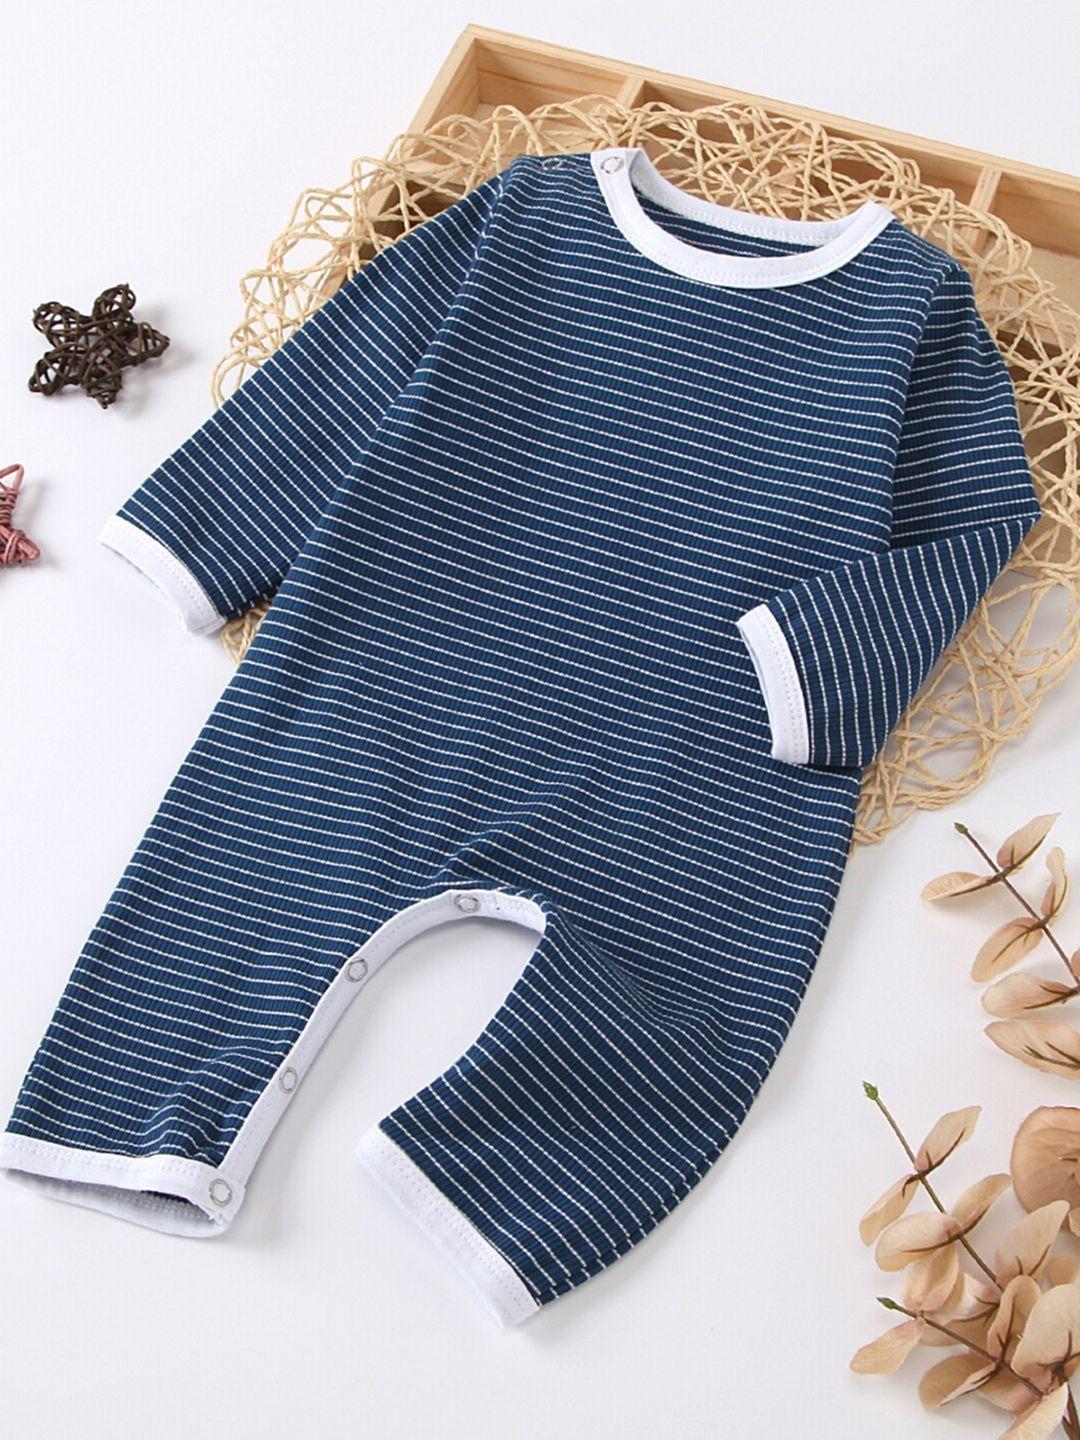 stylecast-girls-striped-cotton-rompers